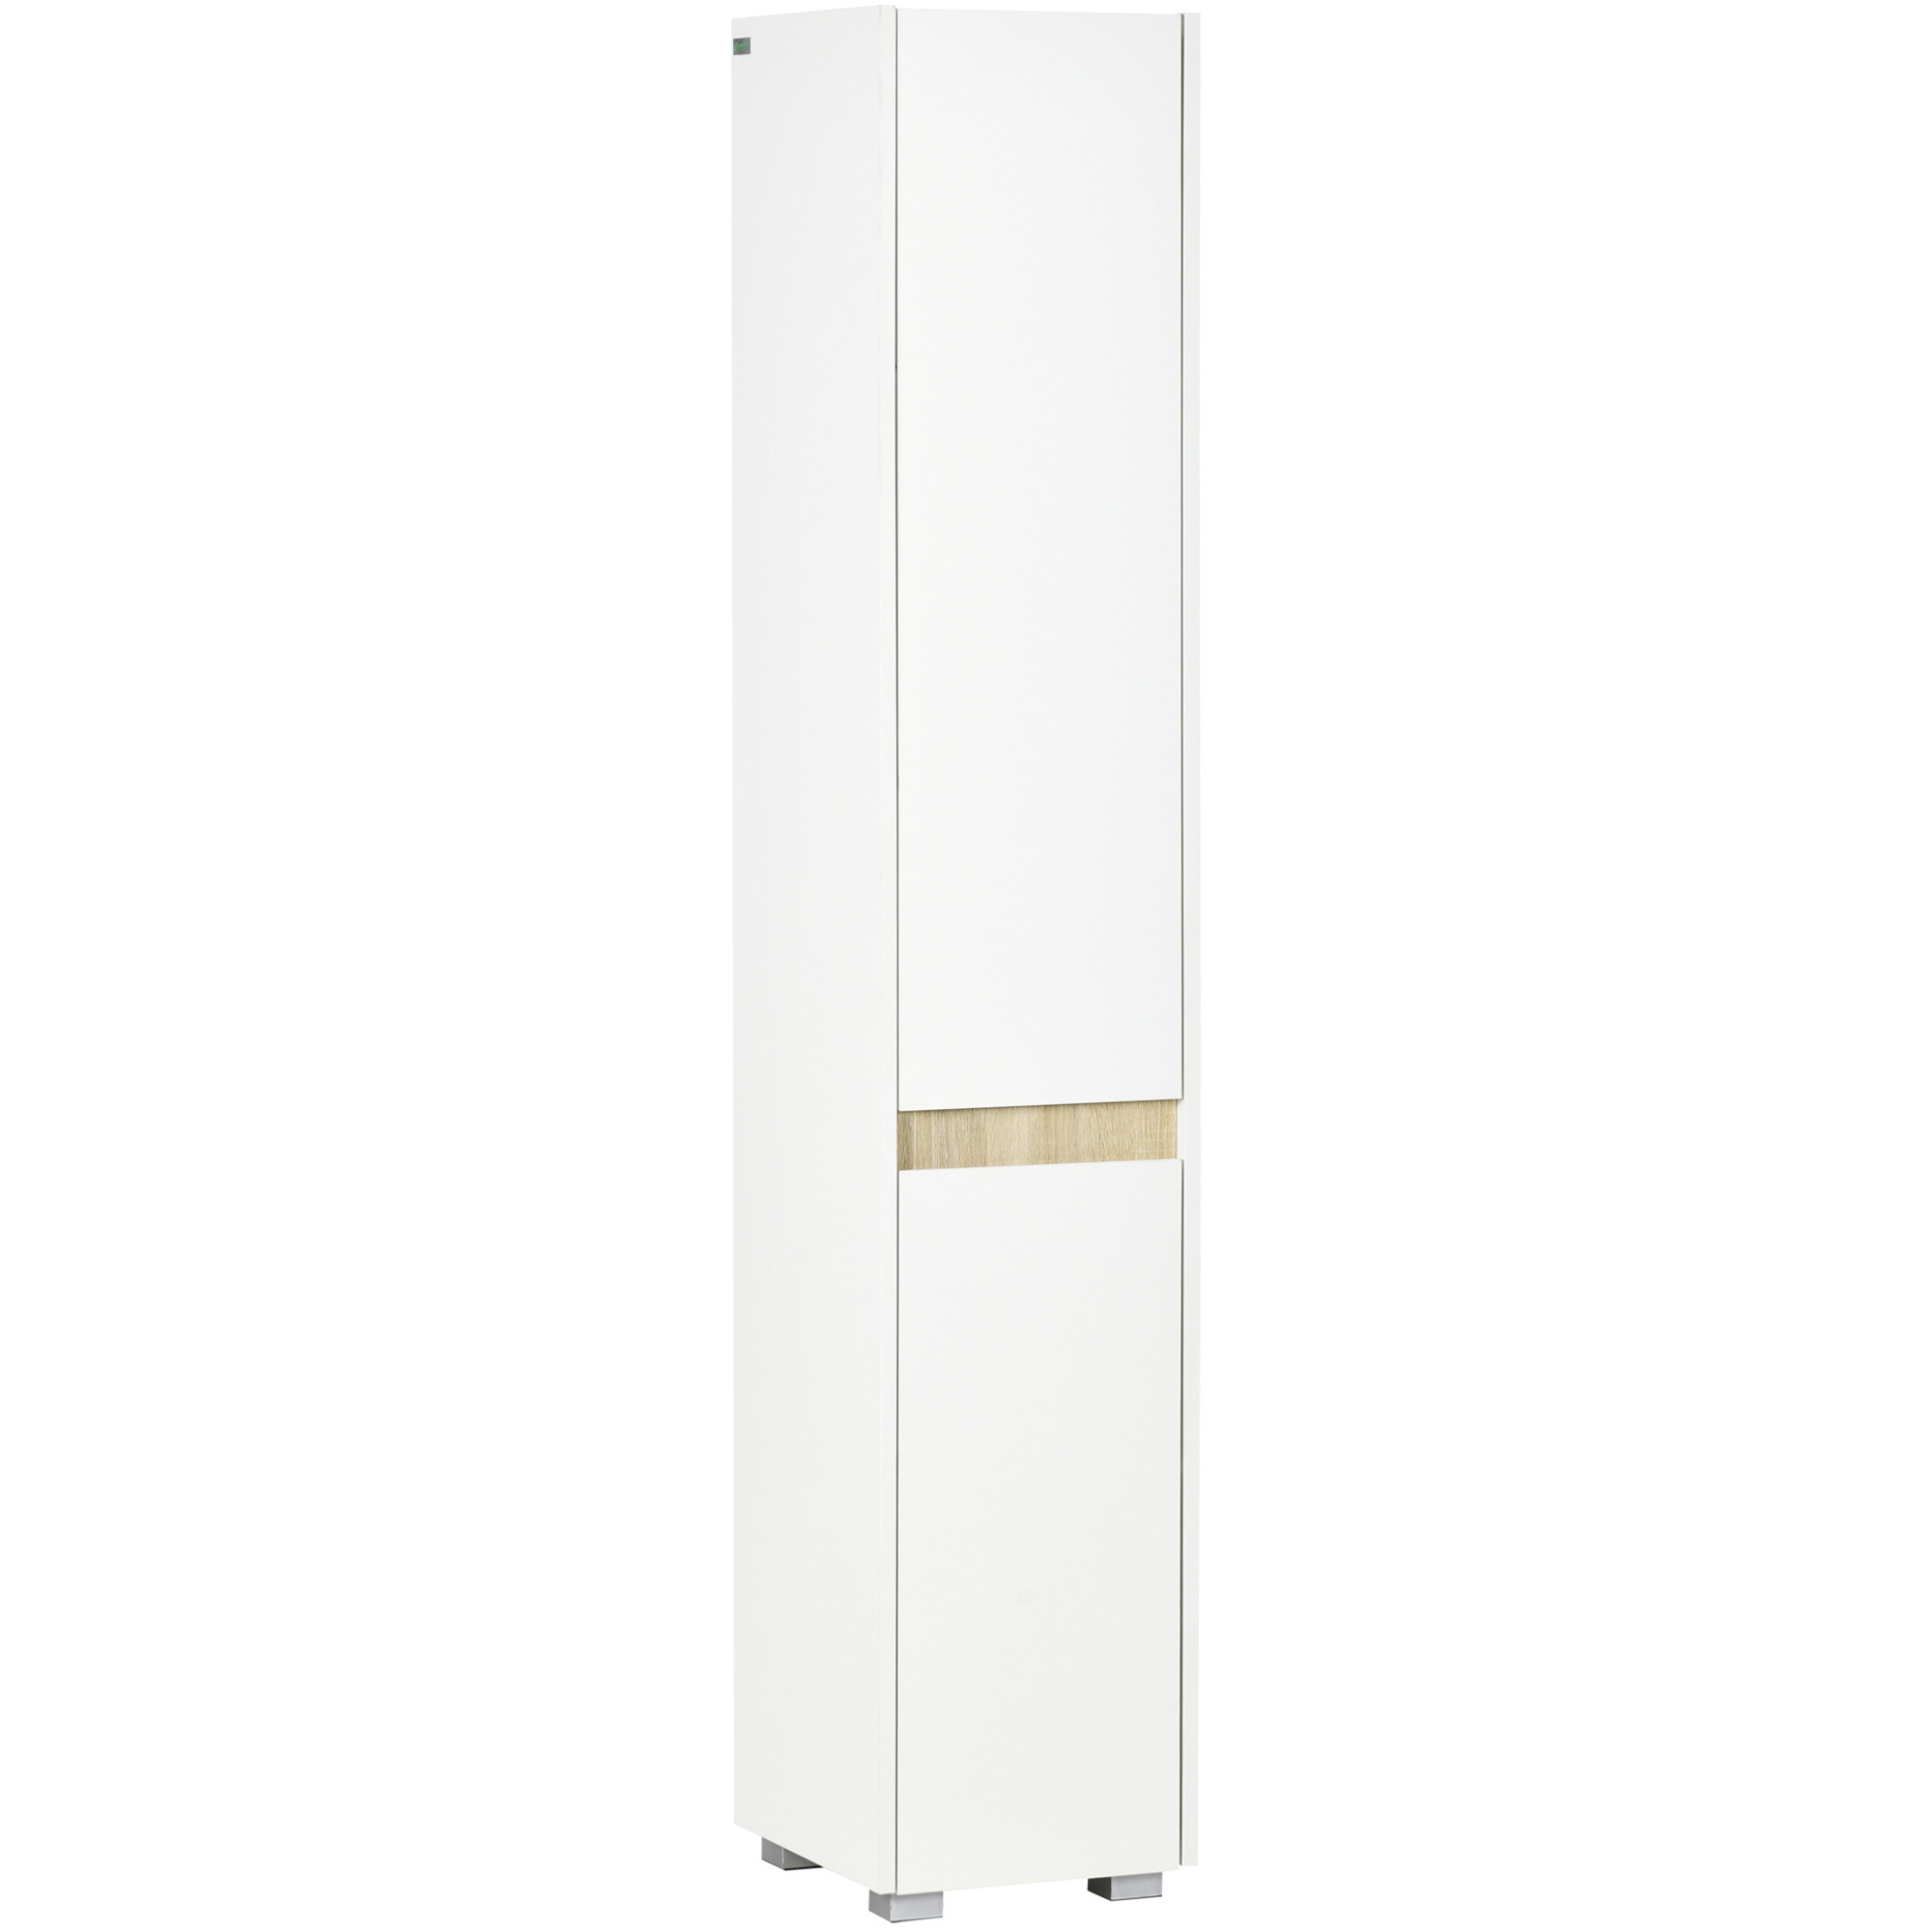 kleankin Tall Bathroom Cabinet with Adjustable Shelves, 5-Tier Modern Freestanding Tallboy with Storage Cabinets, White